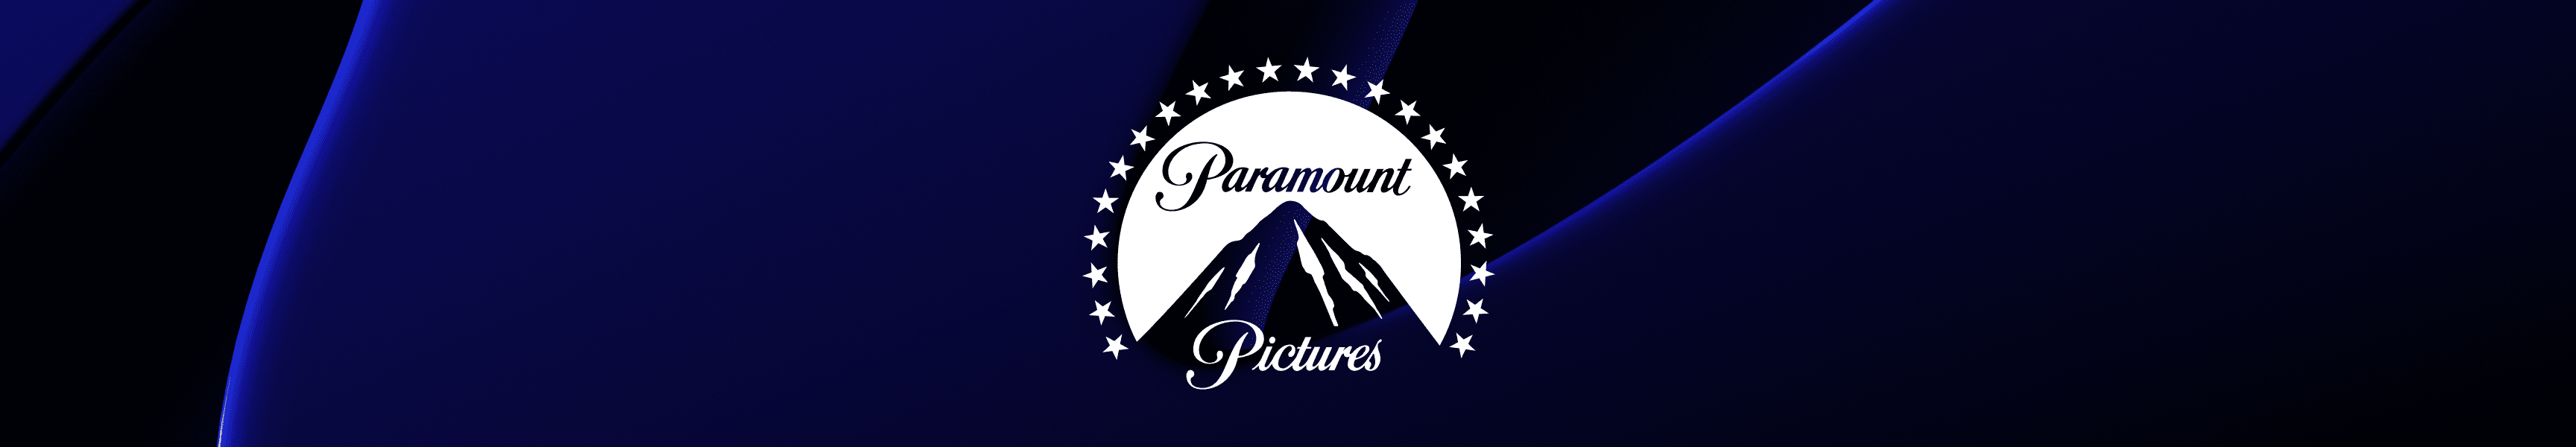 Paramount Pictures Affiches